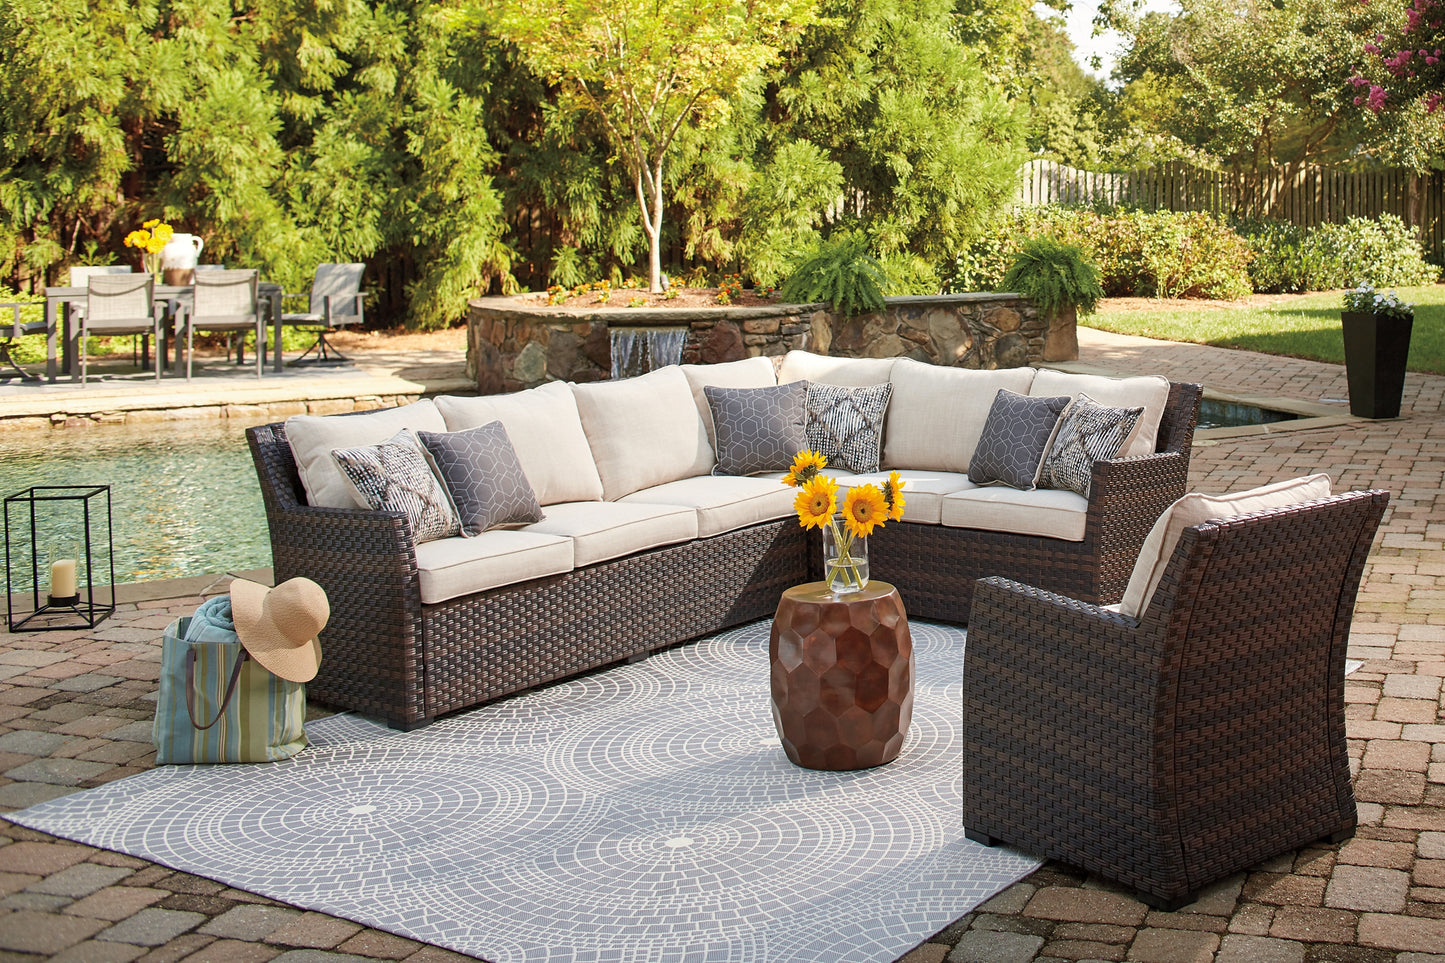 Easy Isle 3-Piece Outdoor Sectional with Chair